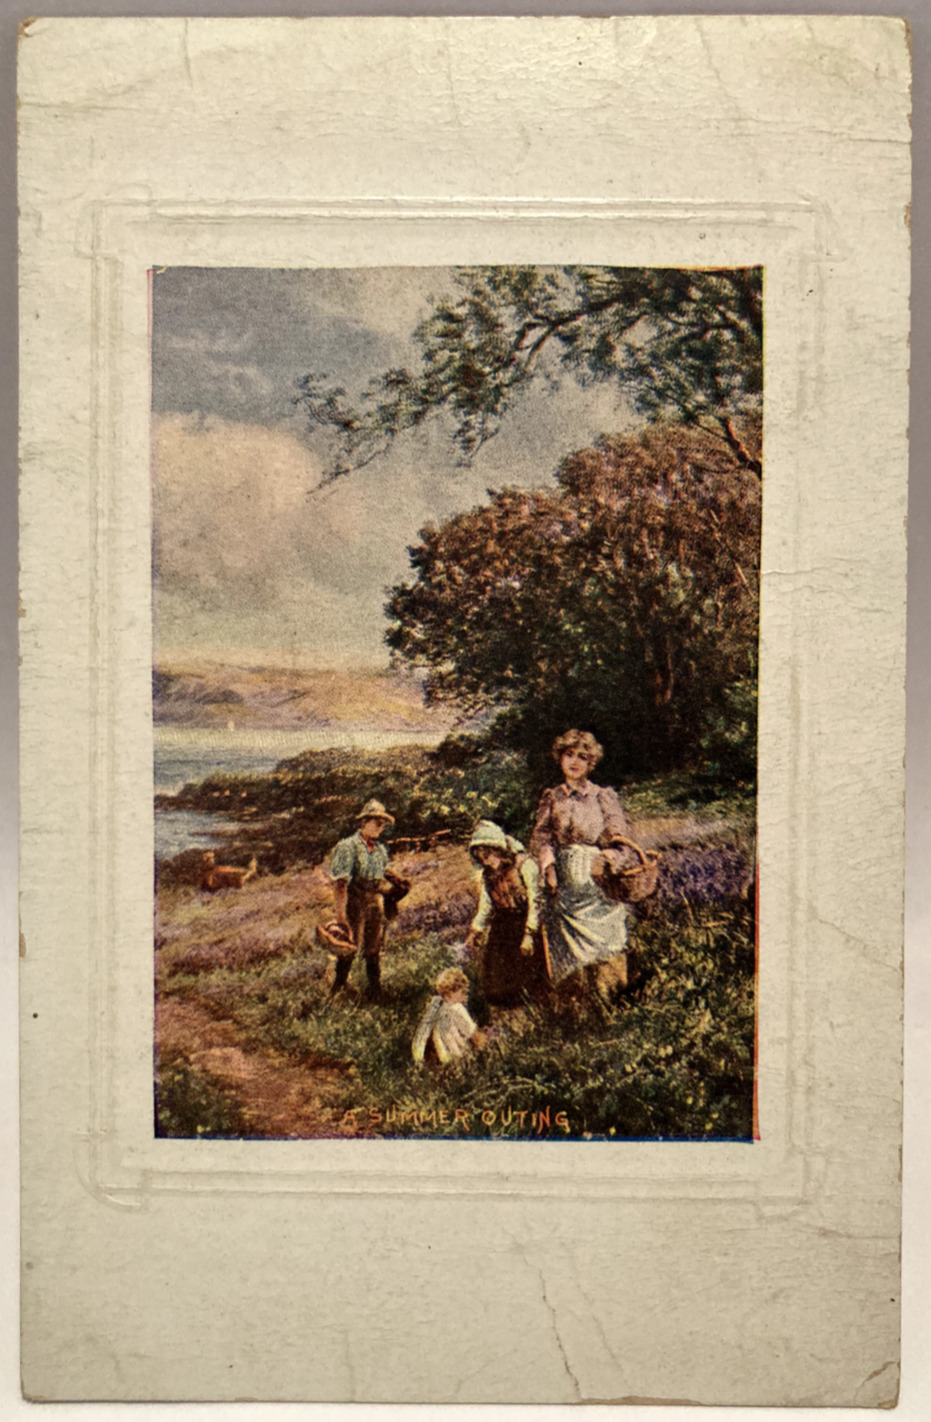 Mother & Children With Baskets on A Summer Outing Vintage Embossed Postcard